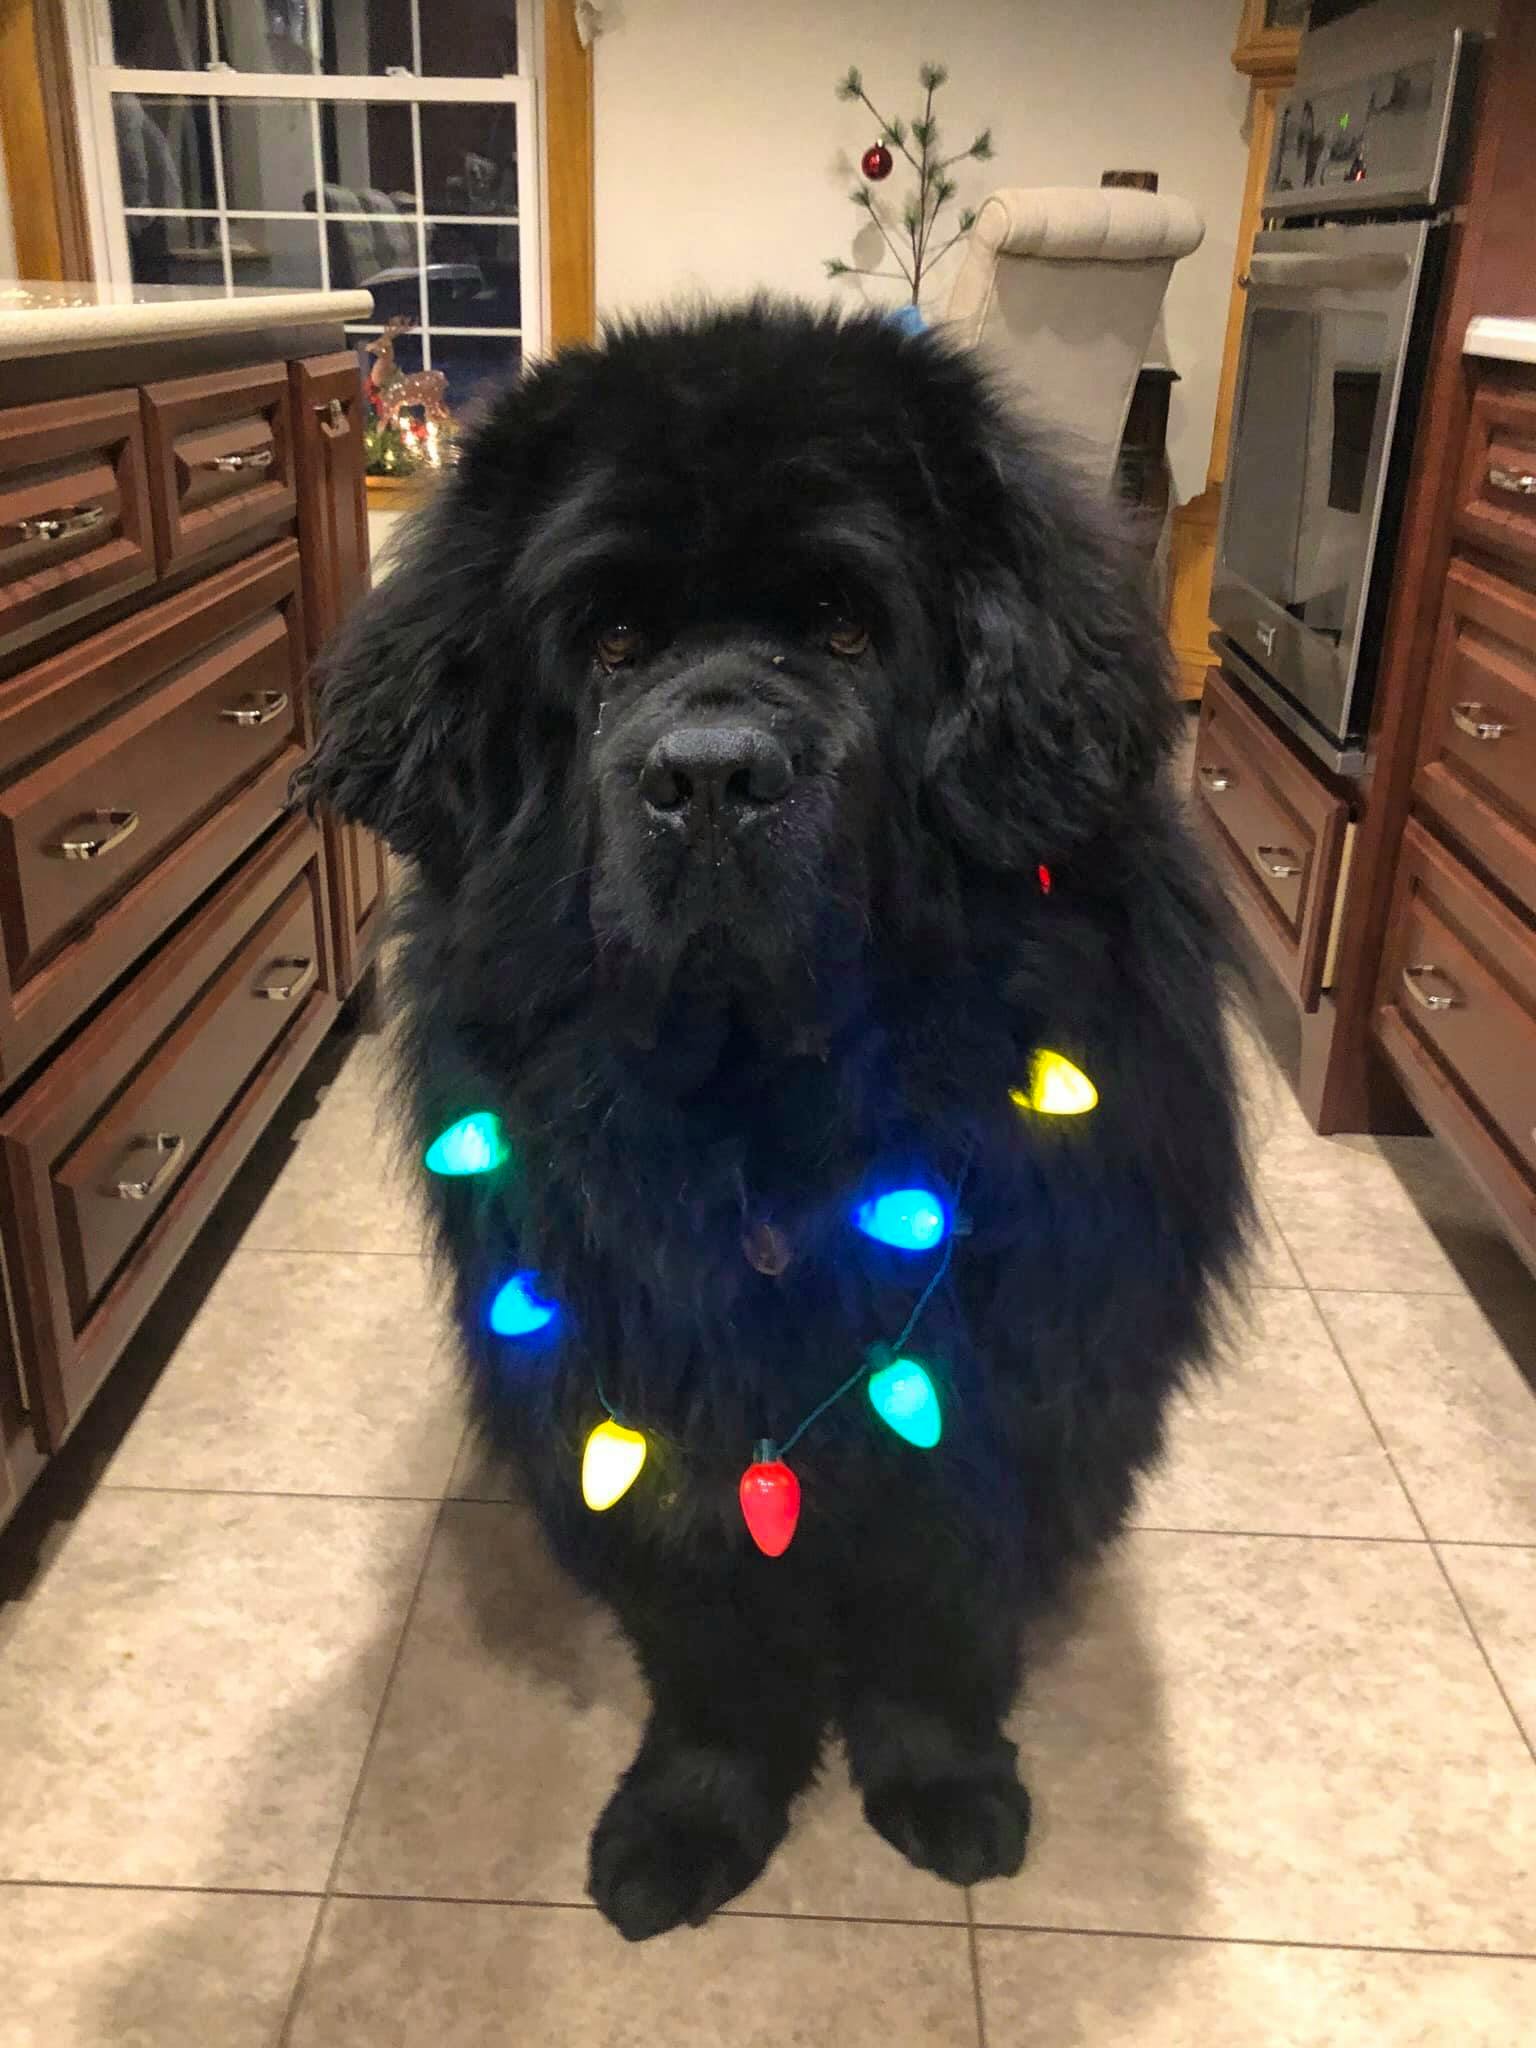 Meet Bosun! Bosun is a seven-year-old Newfoundland dog and Dianne Kelderman shared this photo of him getting into the festive spirit in Truro, N.S. The proud parents of Bosun said they can’t imagine having any other breed of dog. Happy holidays Dianne, and Bosun. Thank you for sharing this photo with me.